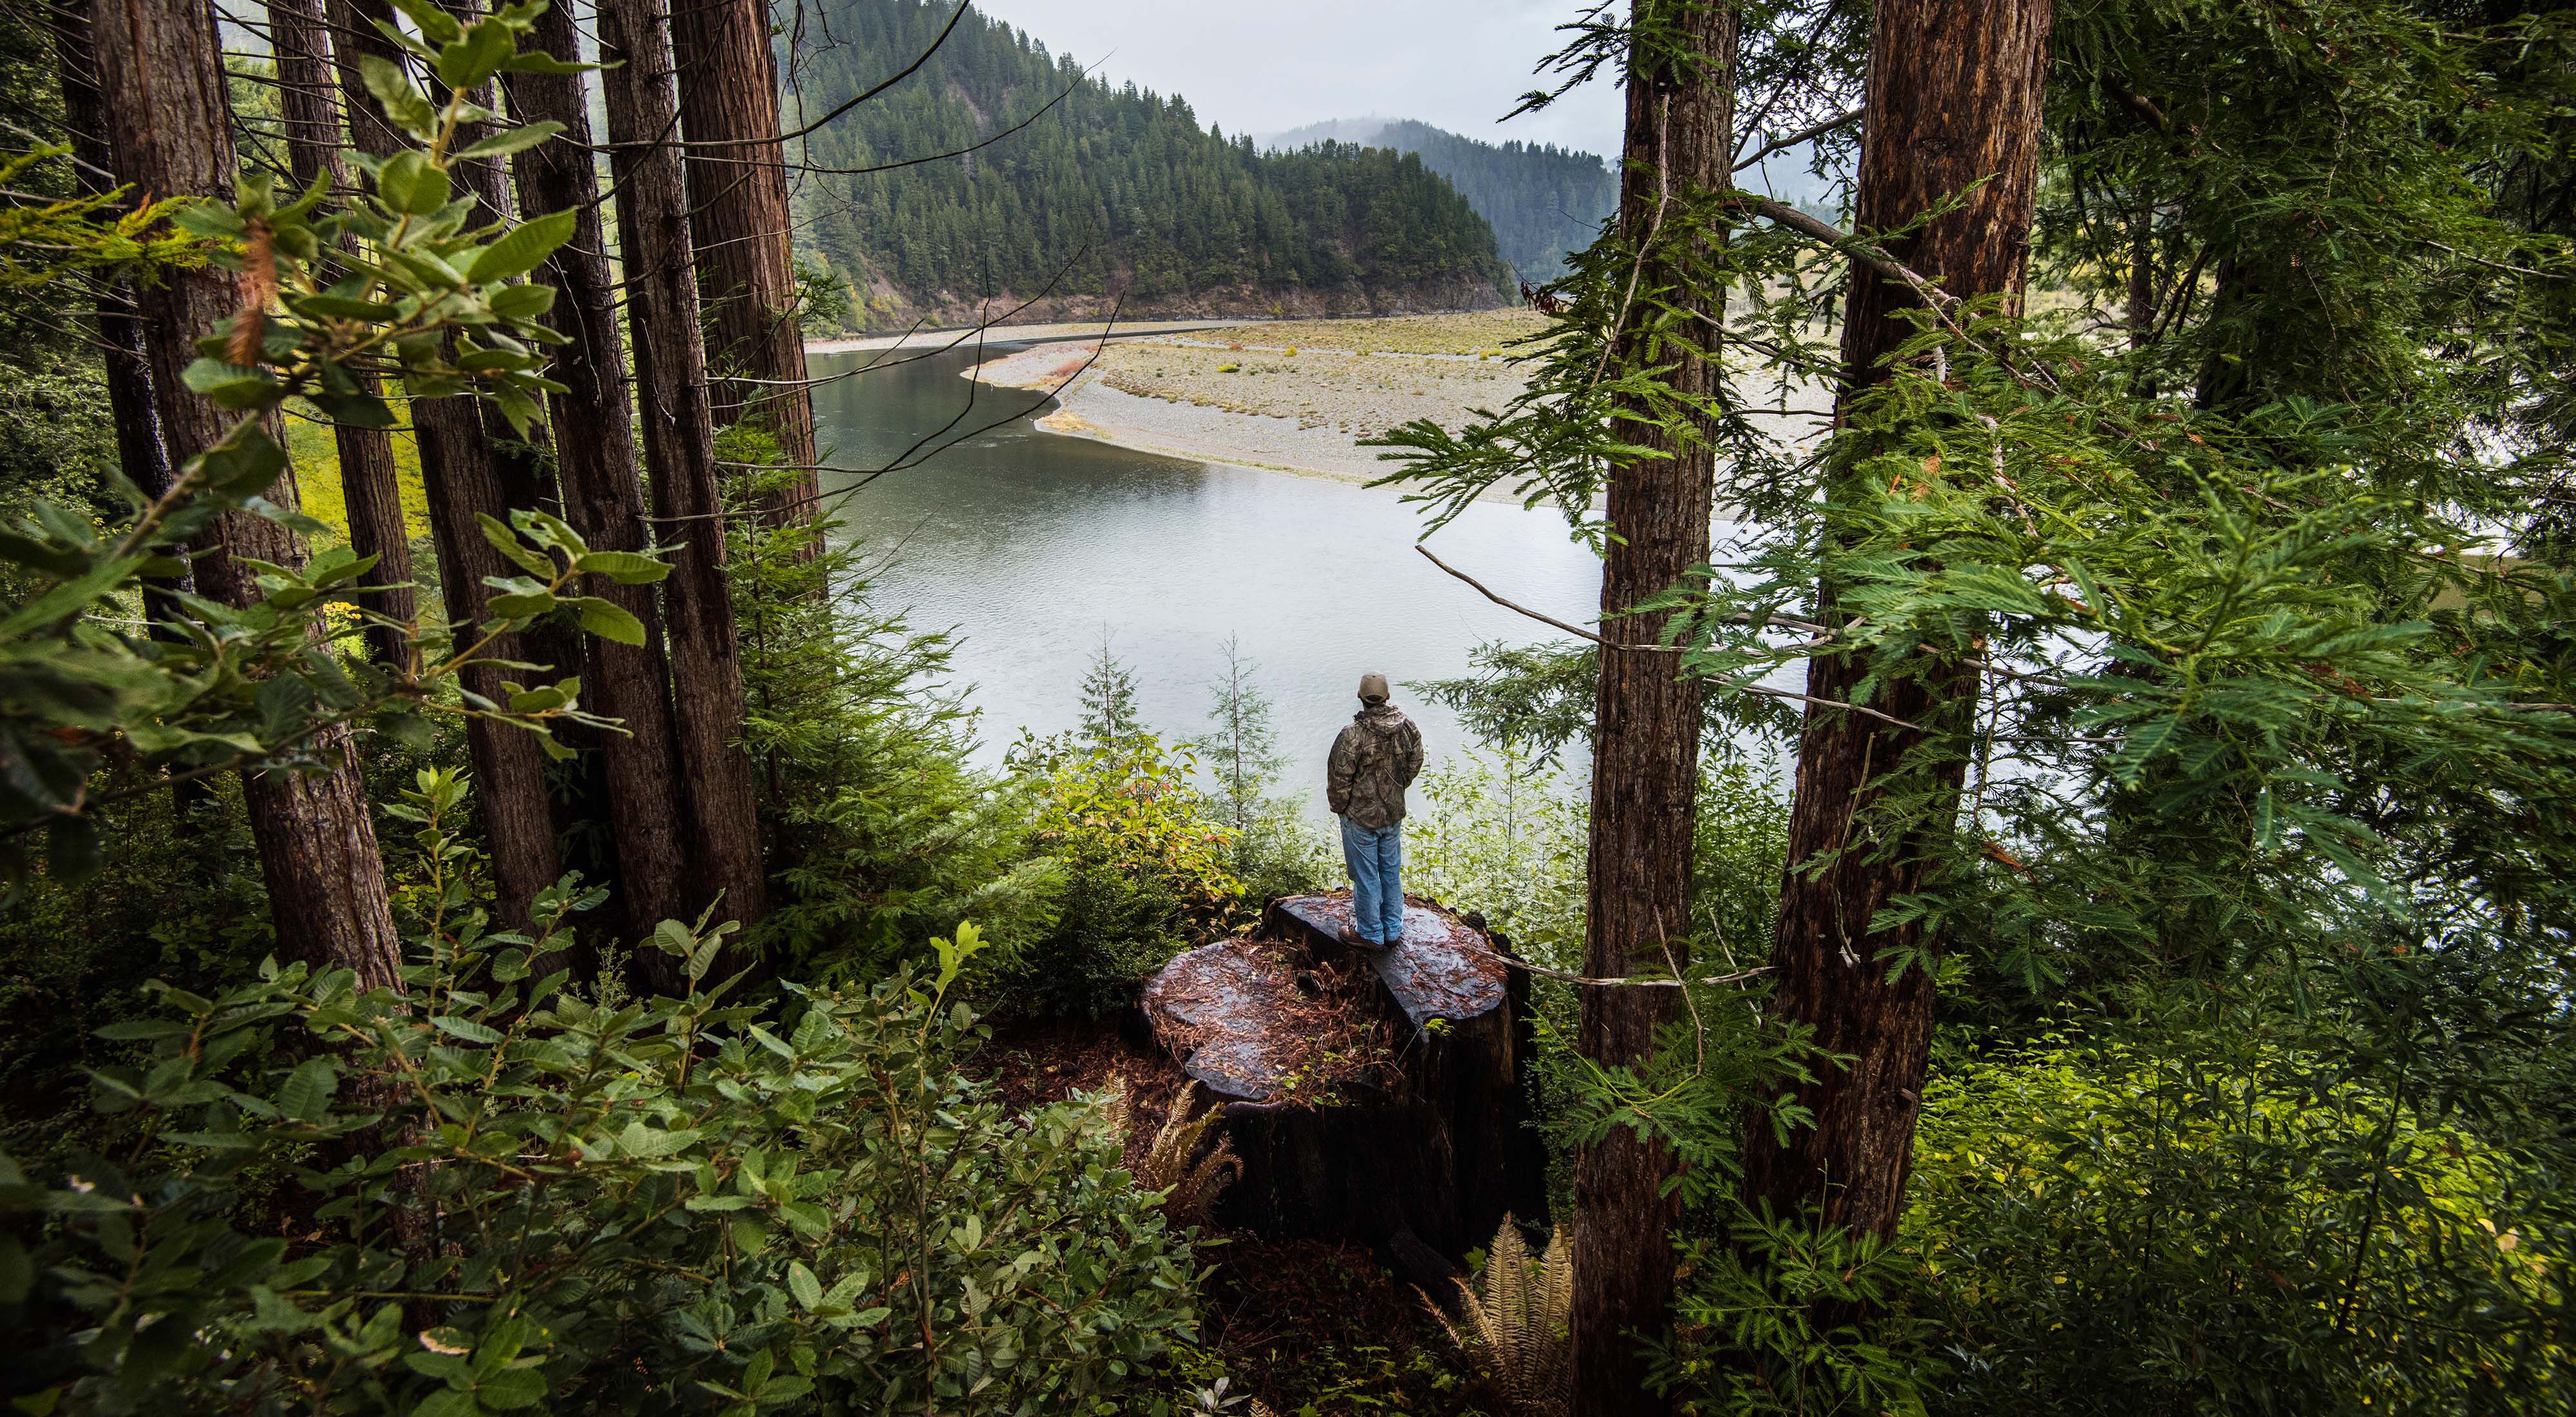 Fishing guide and Yurok tribal member, Pergish Carlson, stands atop a tree trunk and looks at the forests around the Klamath River in northern California.